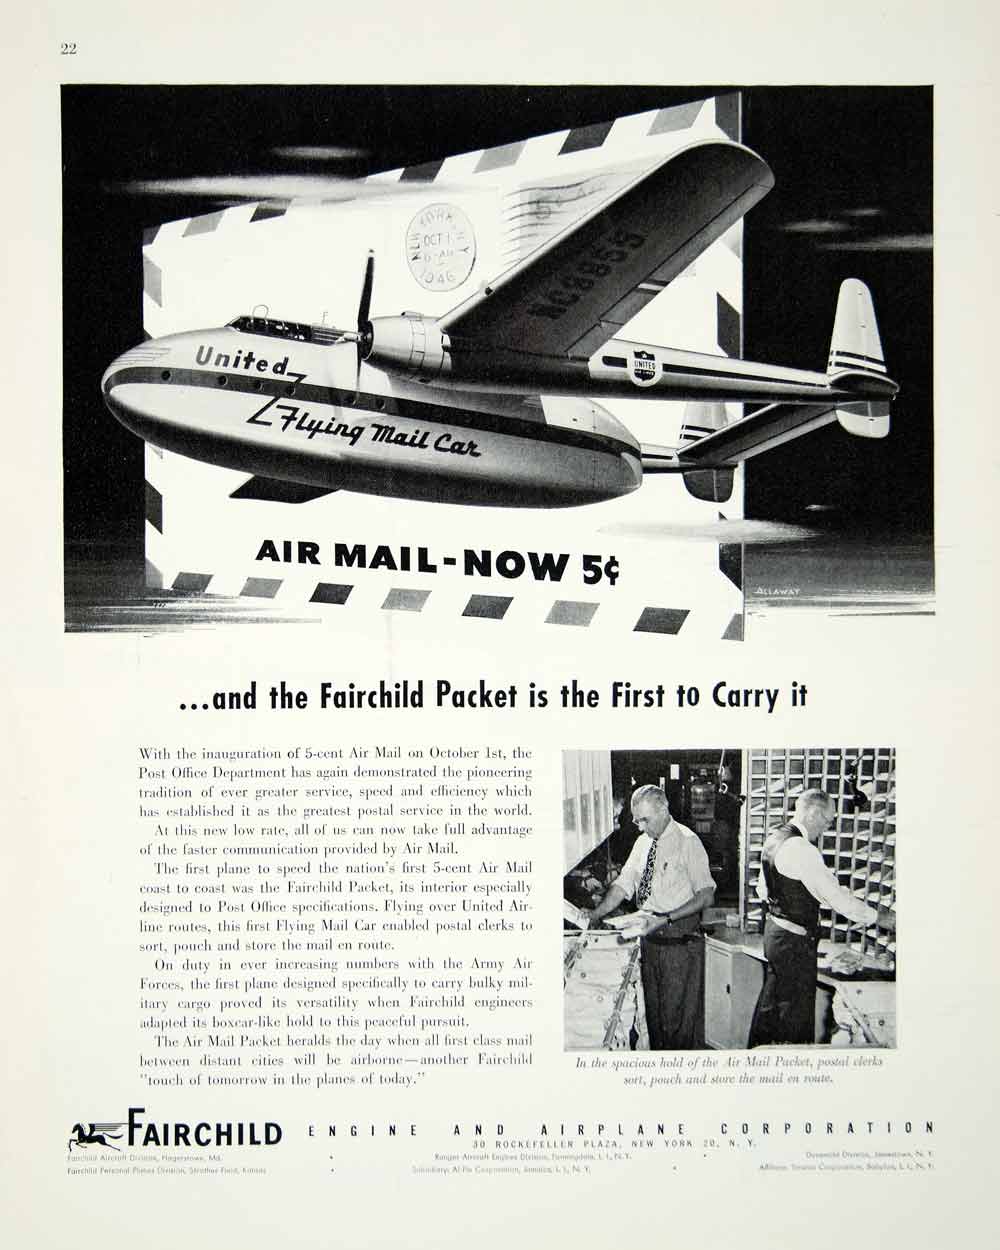 1946 Ad Fairchild Engine Airplane Corporation Aviation Mail Carrier Fly FTM1